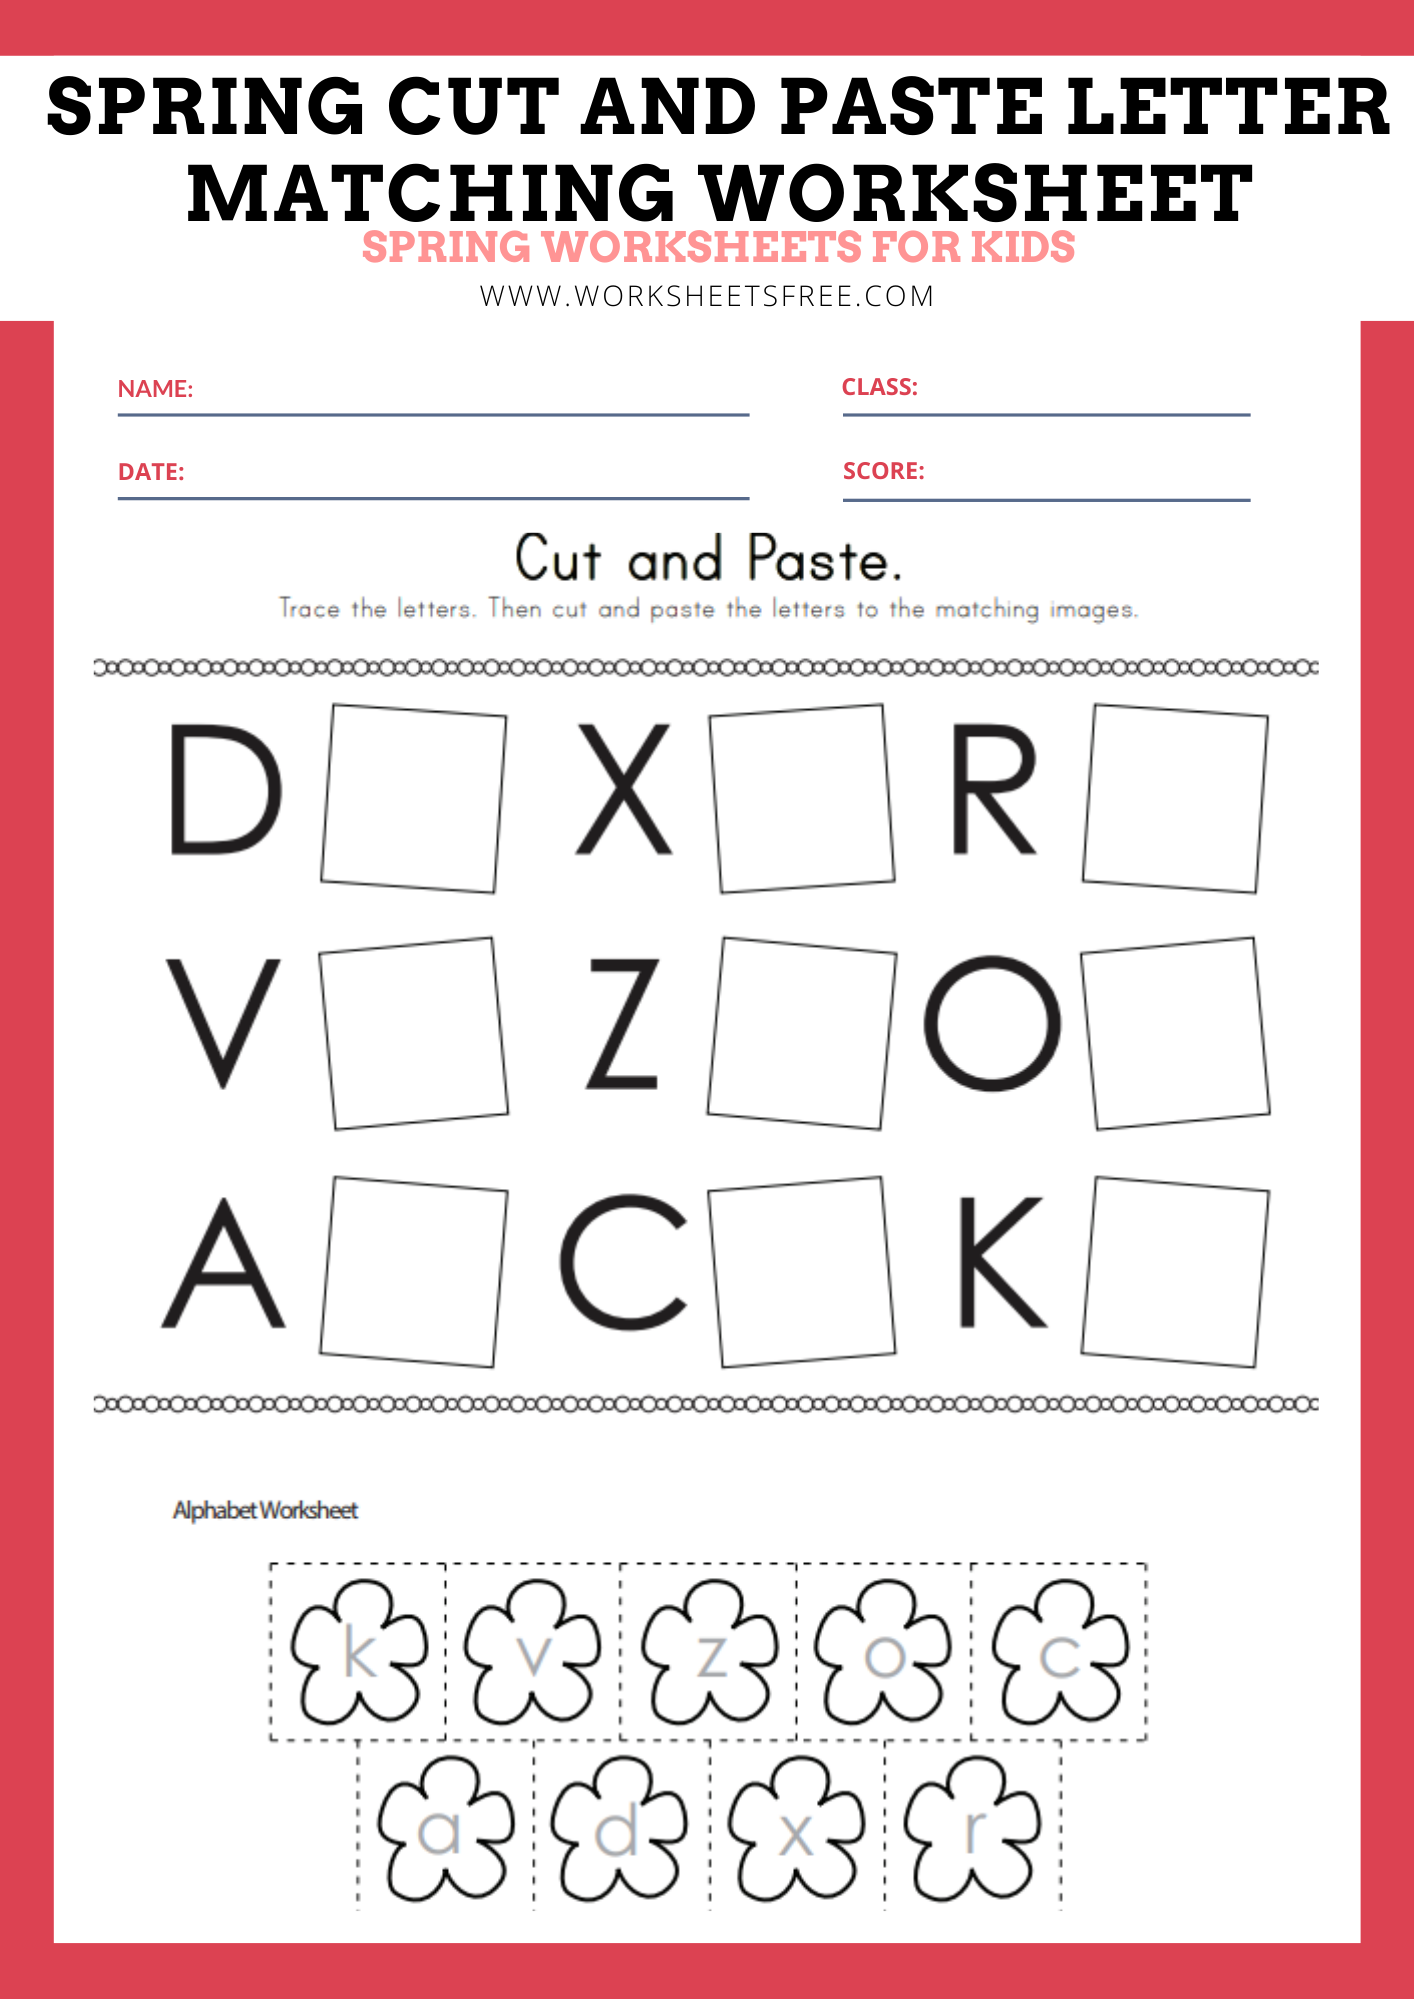 Spring Cut And Paste Letter Matching Worksheet Worksheets Free